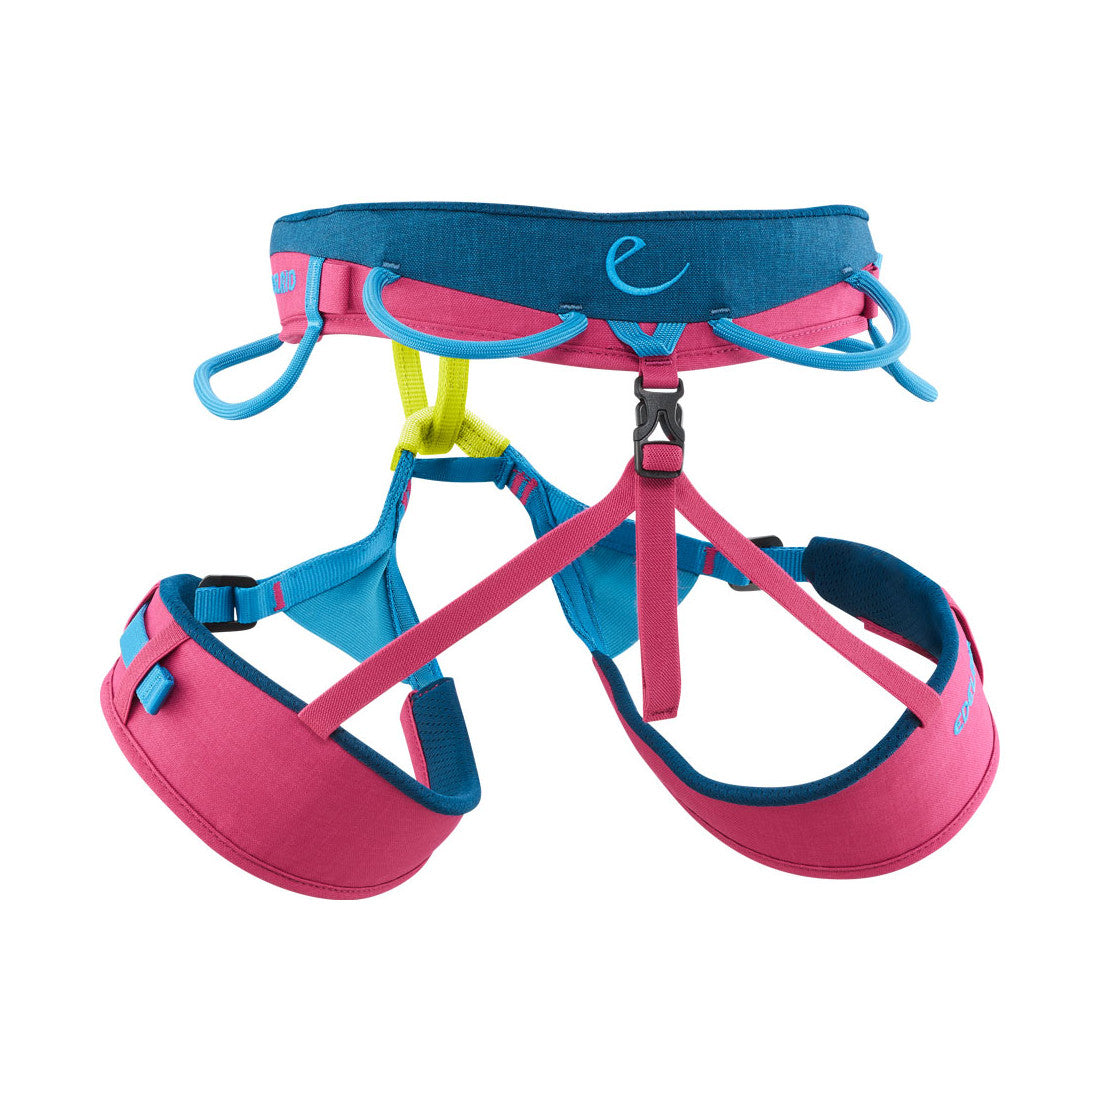 Edelrid Jayne III climbing Harness, front/side view in blue, pink and yellow colours